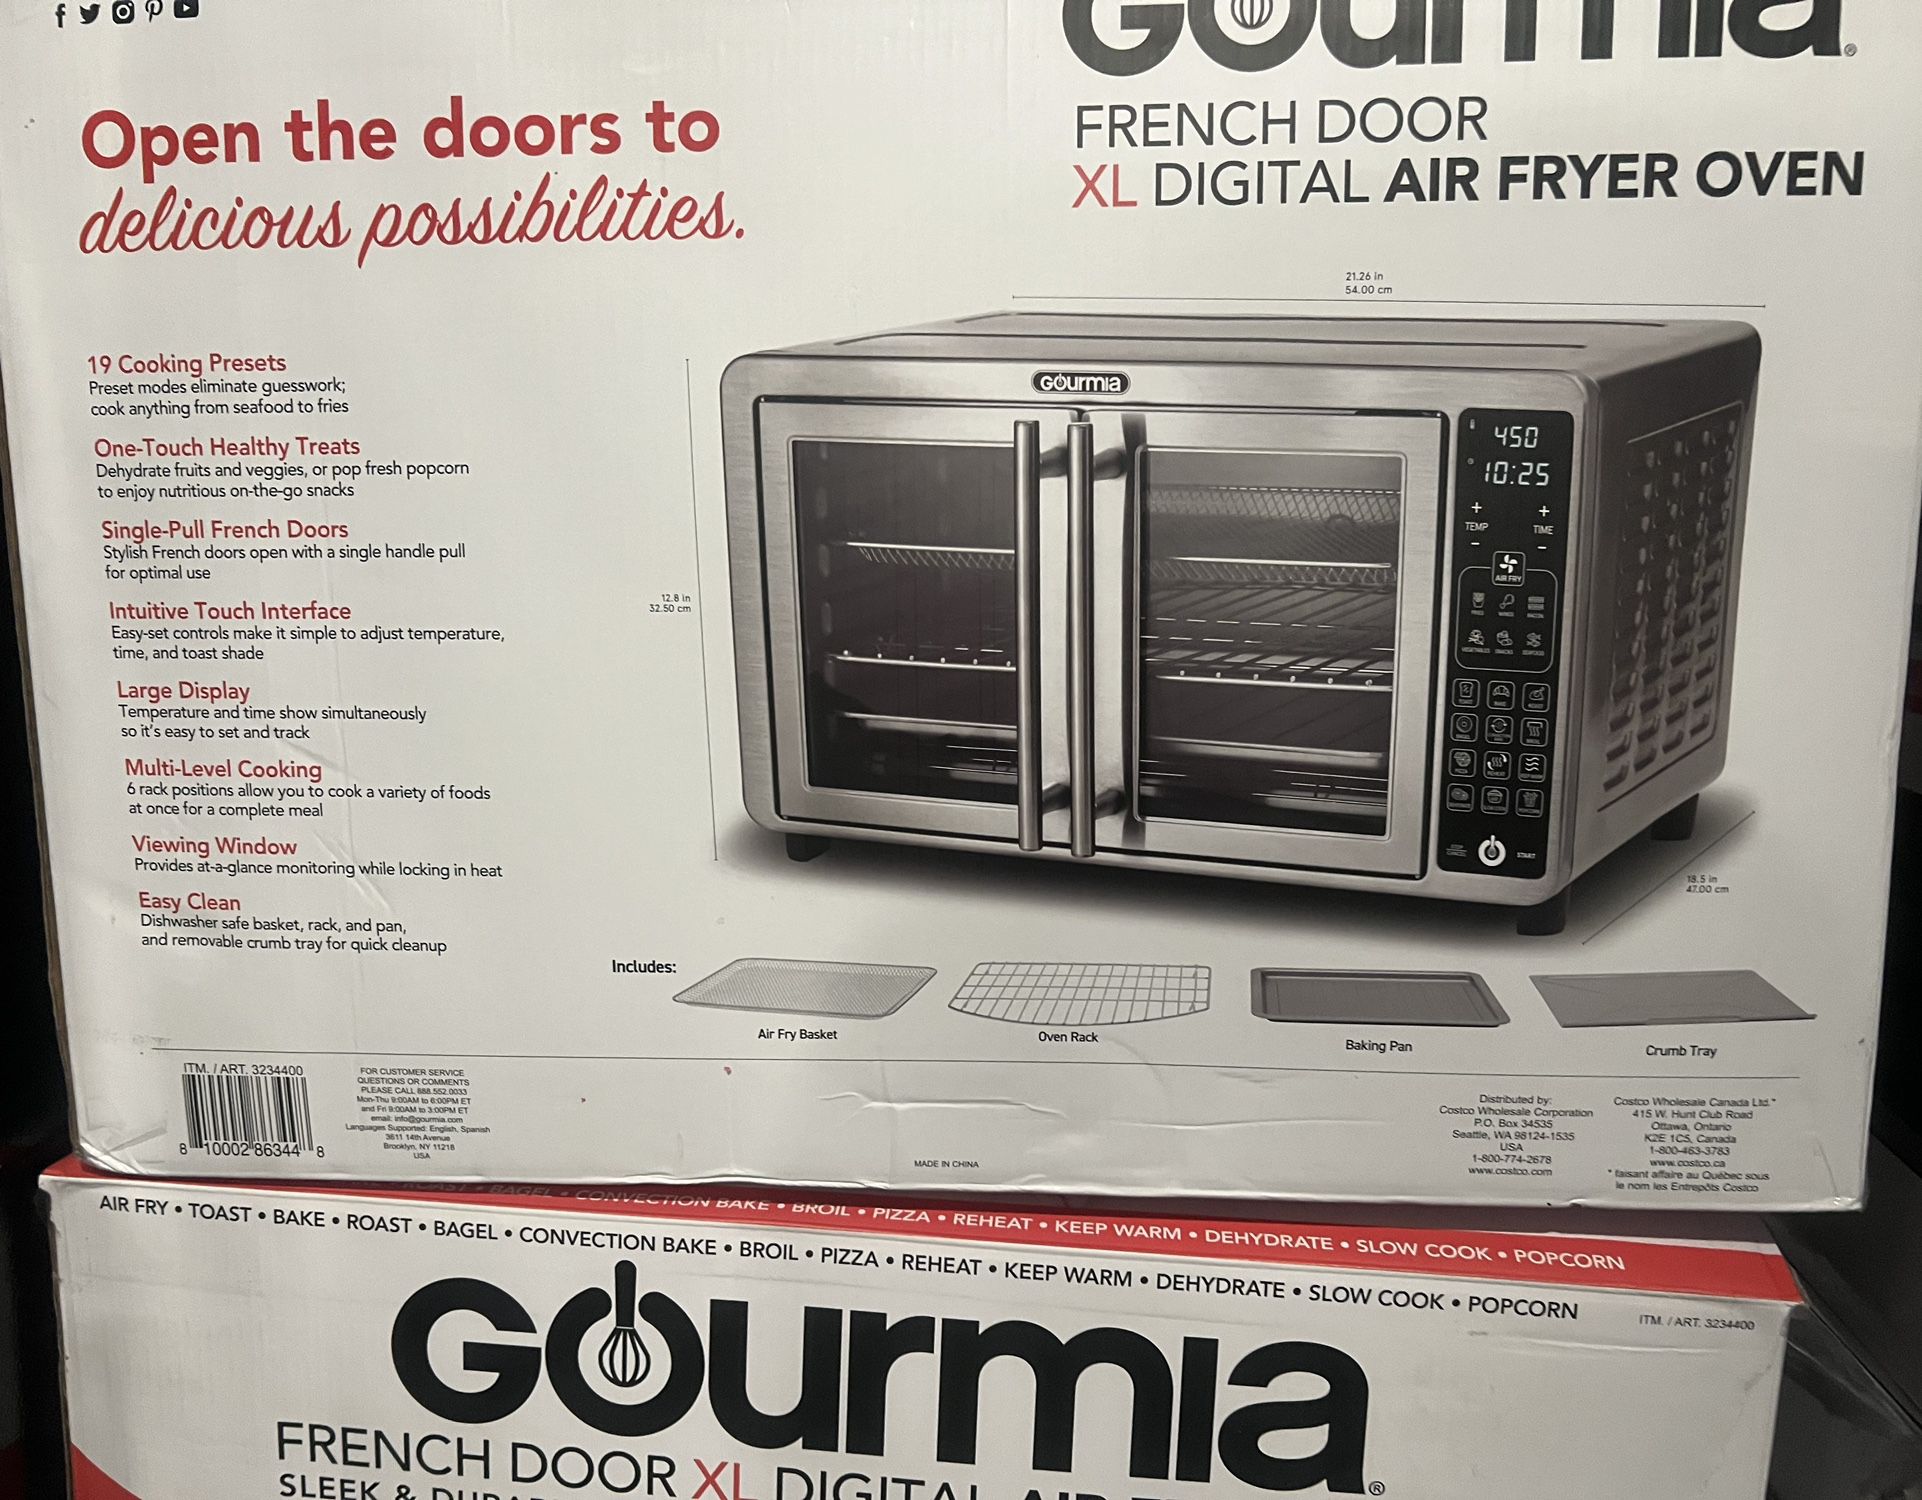 Selling French Door XL Air Fryer Oven Gourmia